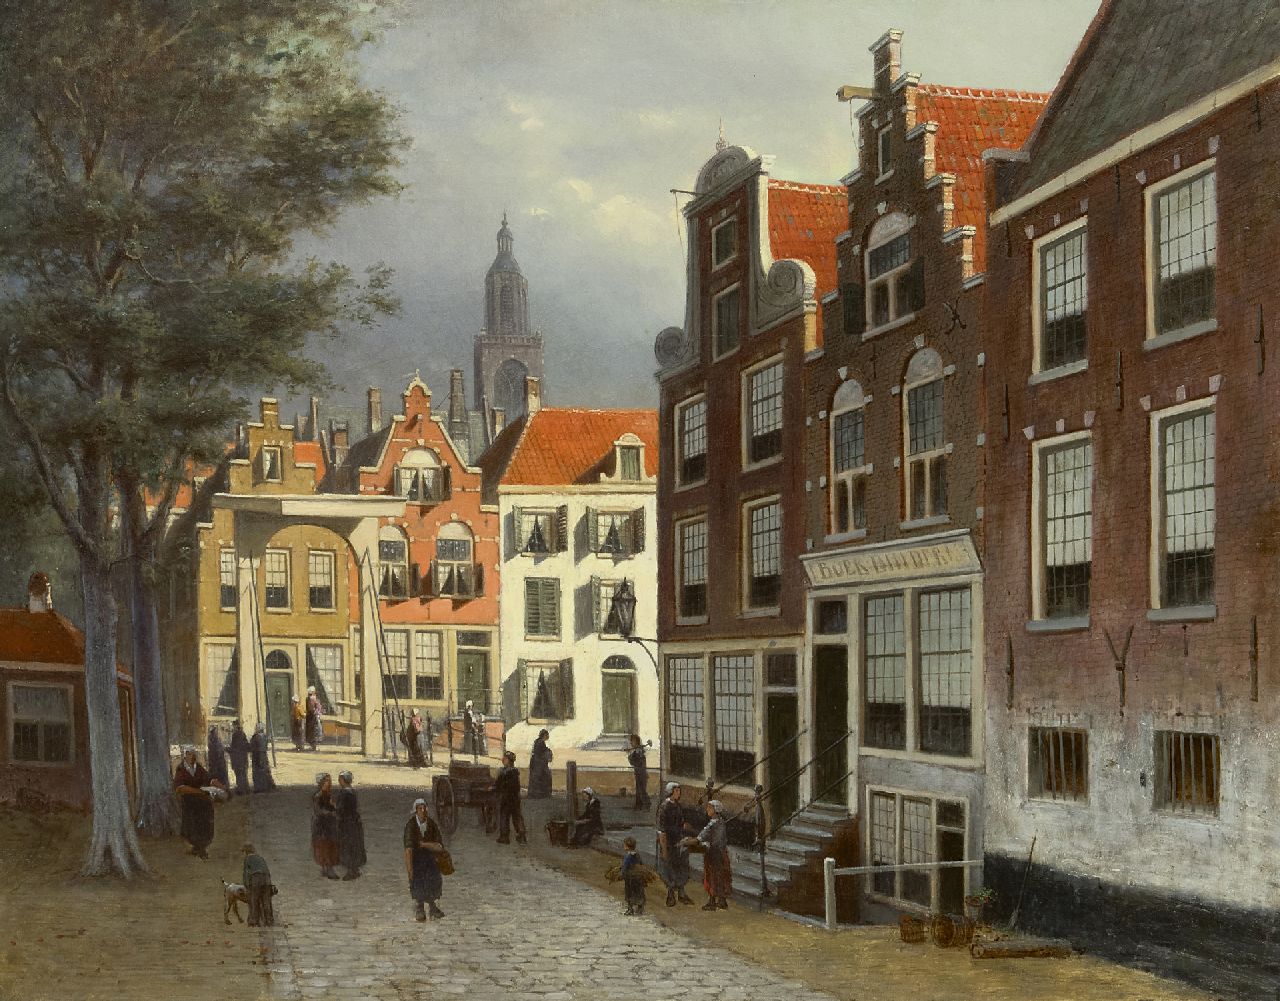 Hulk sr. J.F.  | Johannes Frederik Hulk sr. | Paintings offered for sale | Town view with figures, oil on canvas 66.7 x 82.5 cm